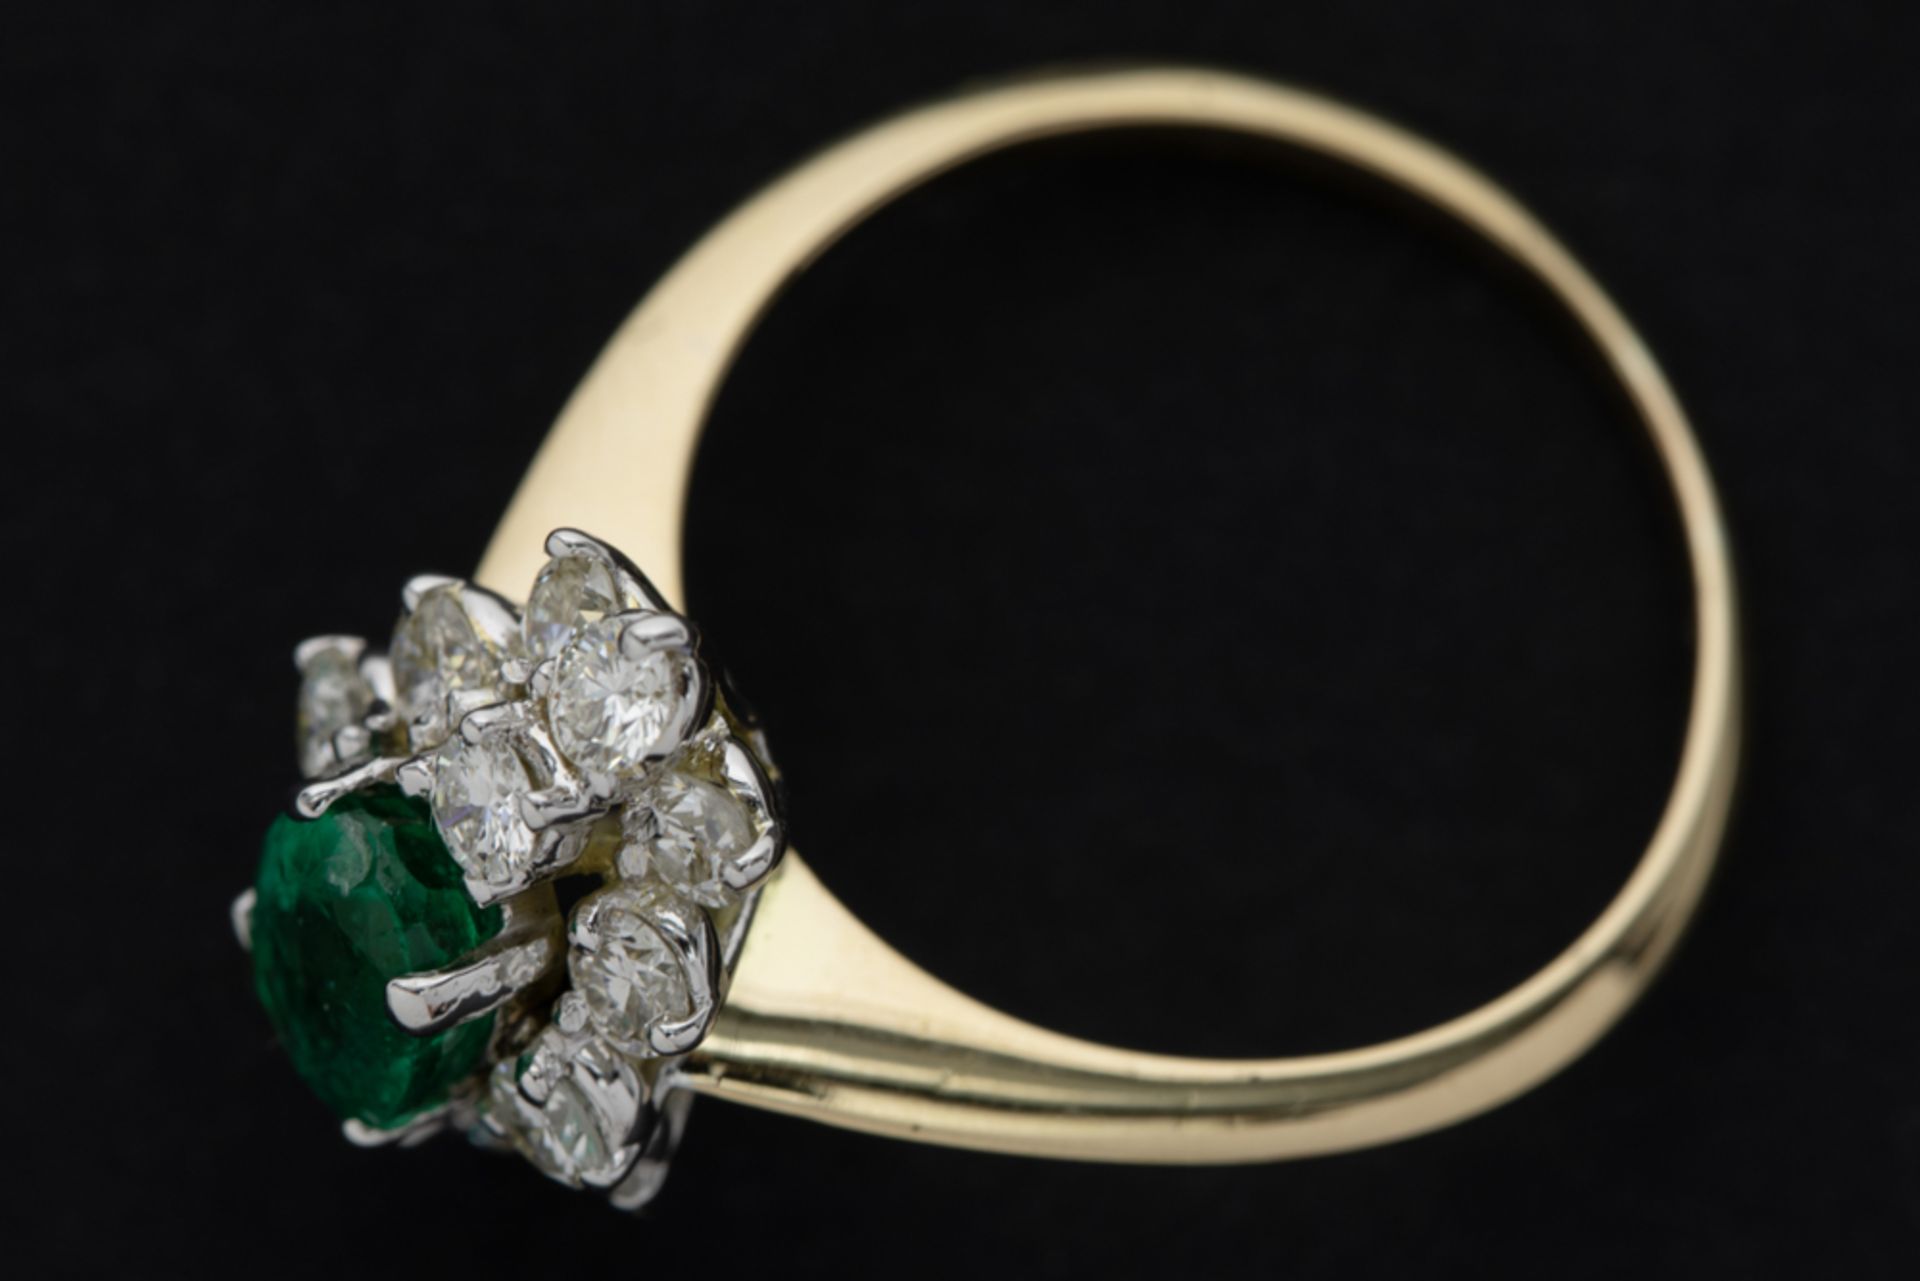 seventies' cocktail ring in yellow and white gold (18 carat) with a more then 1 carat oval emerald - Image 2 of 2